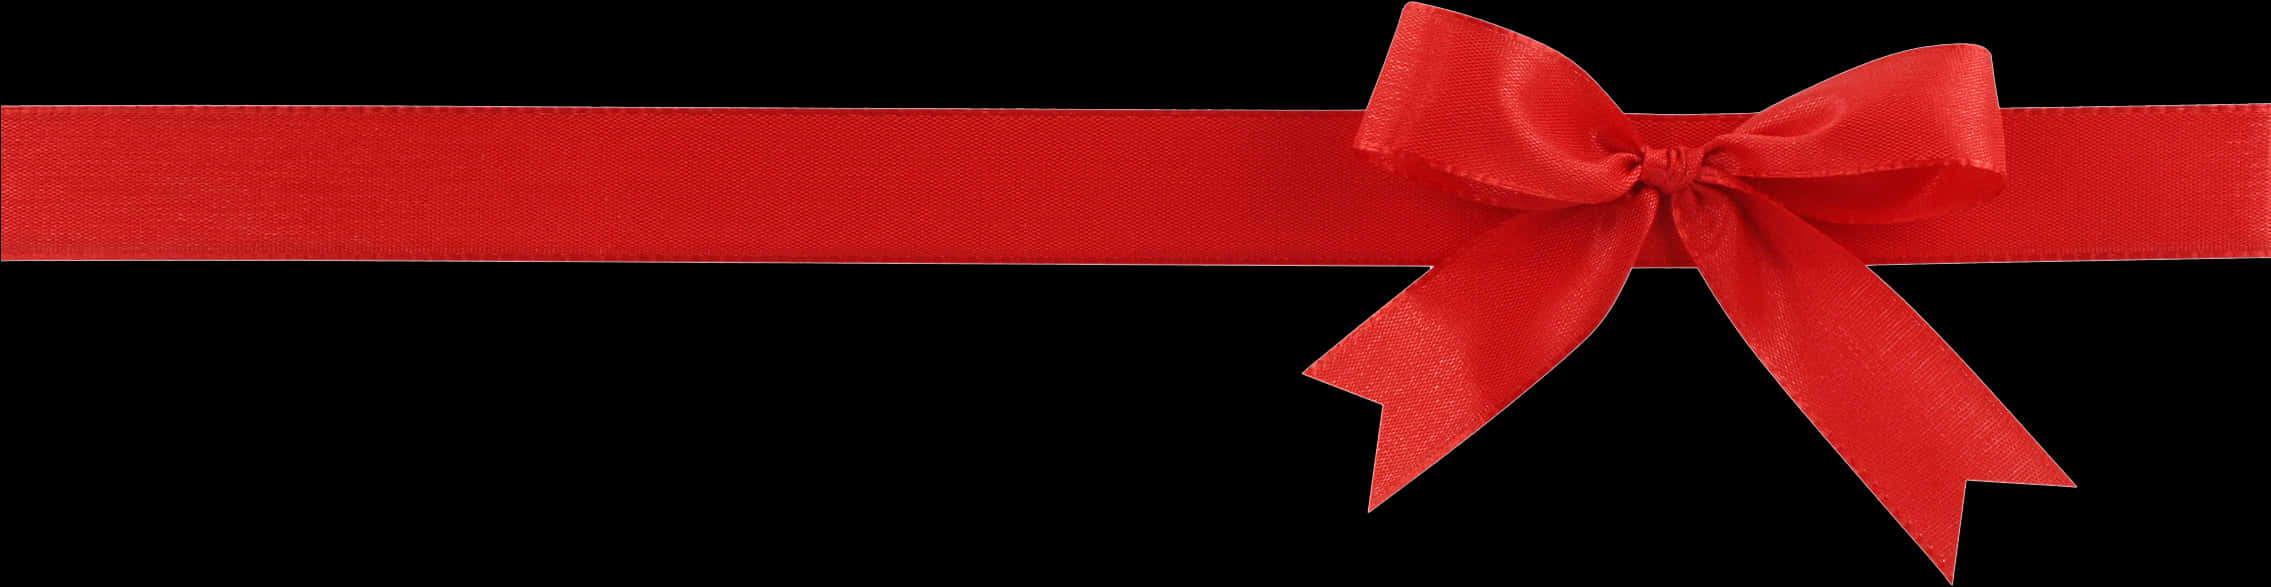 Red Ribbon Bow Black Background PNG image